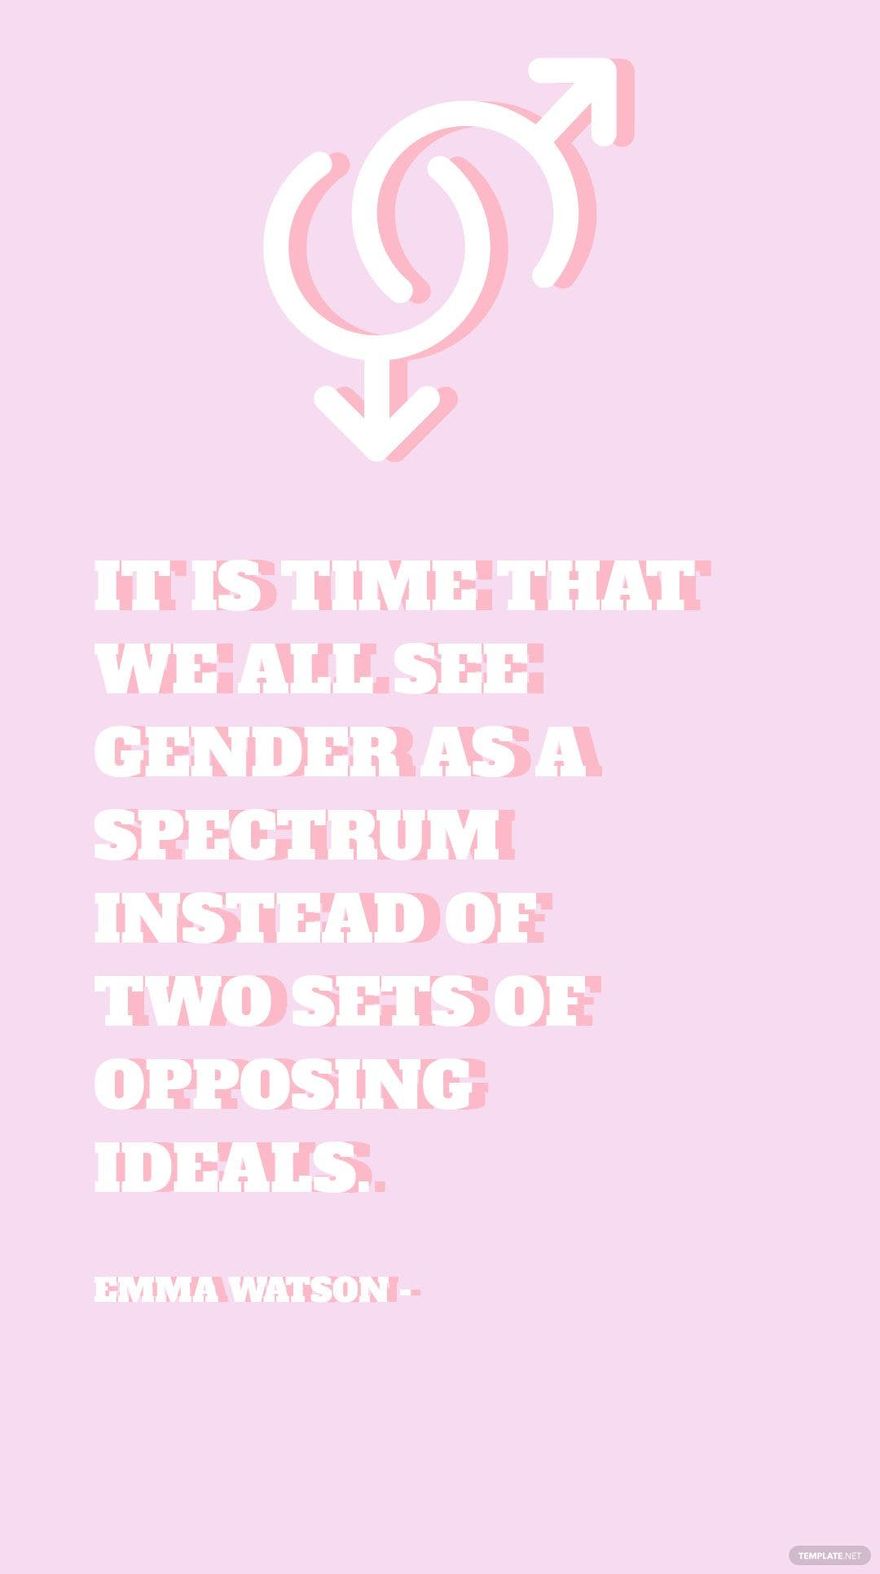 Emma Watson - It is time that we all see gender as a spectrum instead of two sets of opposing ideals. in JPG